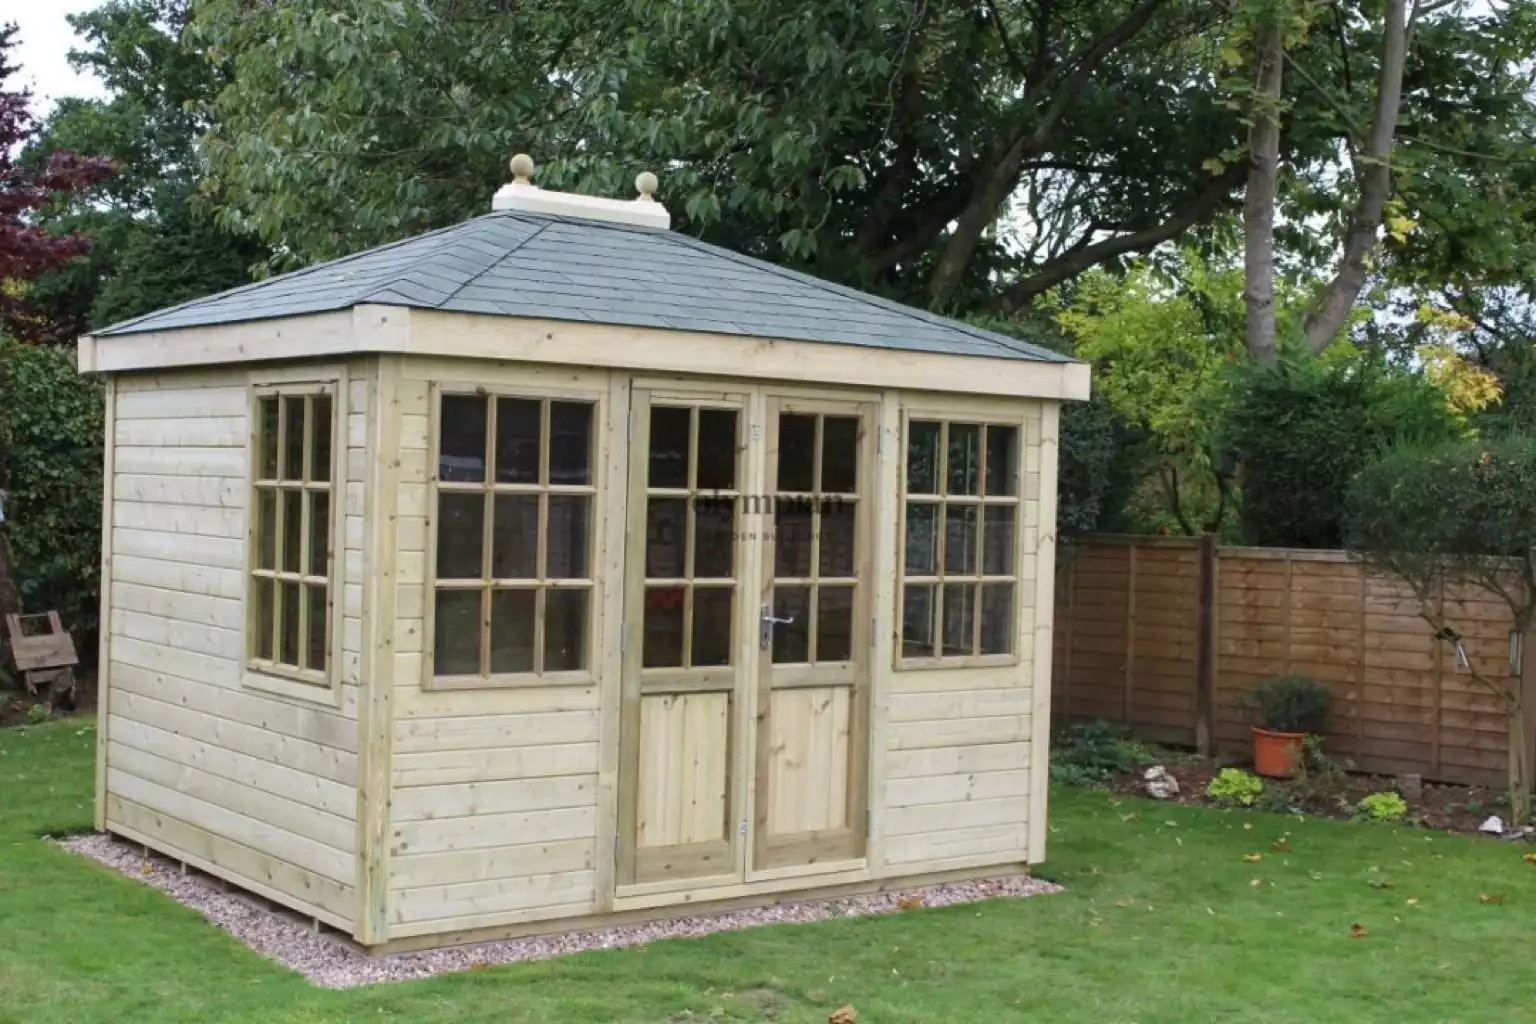 Hipped roof summerhouse with felt shingles